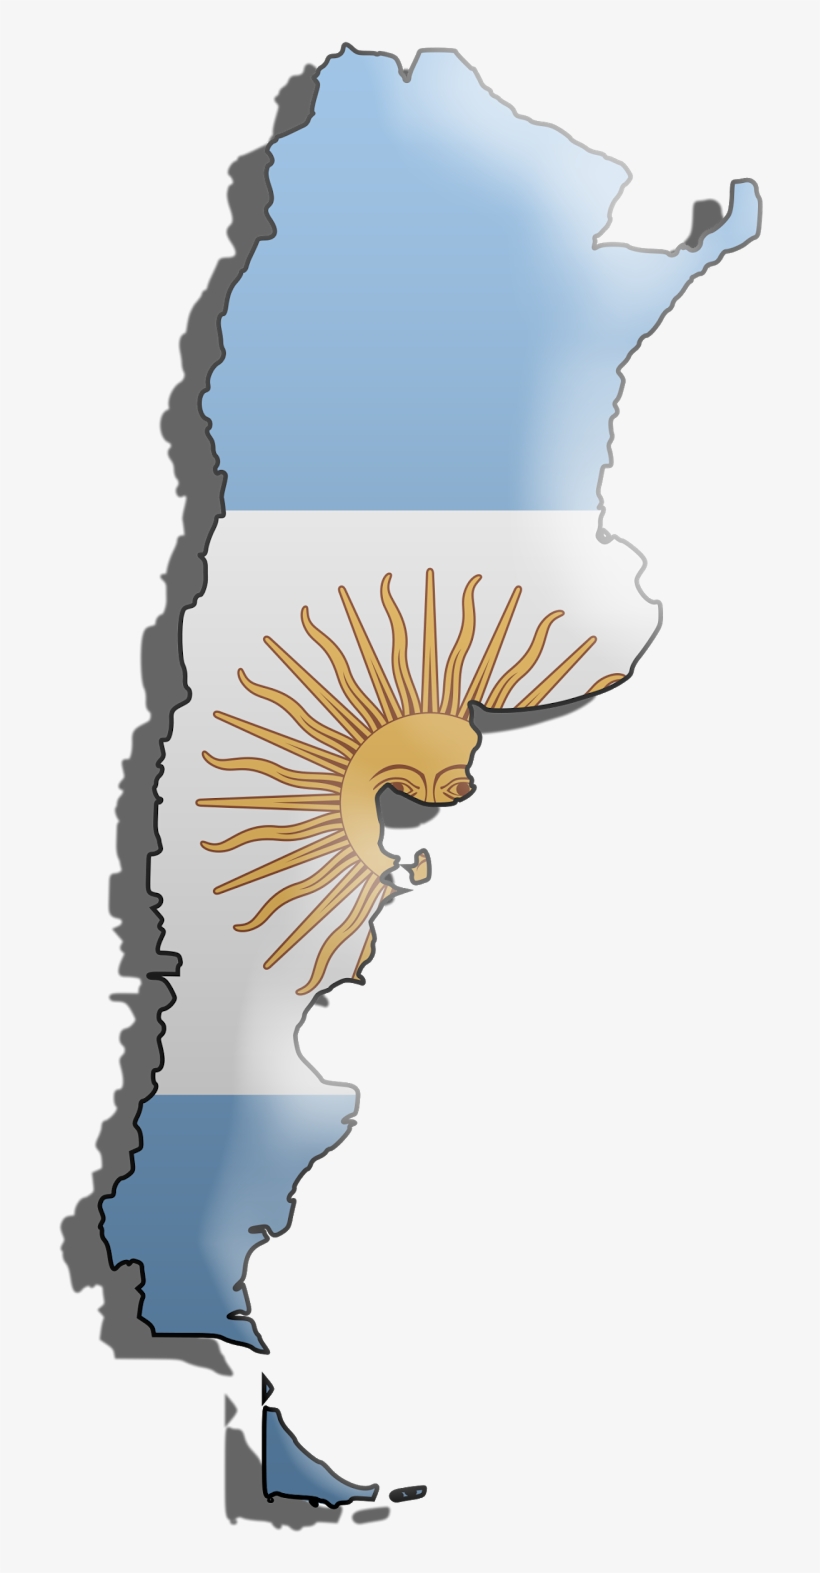 Wallpapers Flag Of Argentina - Argentina Flag Hd Iphone, transparent png #1143642